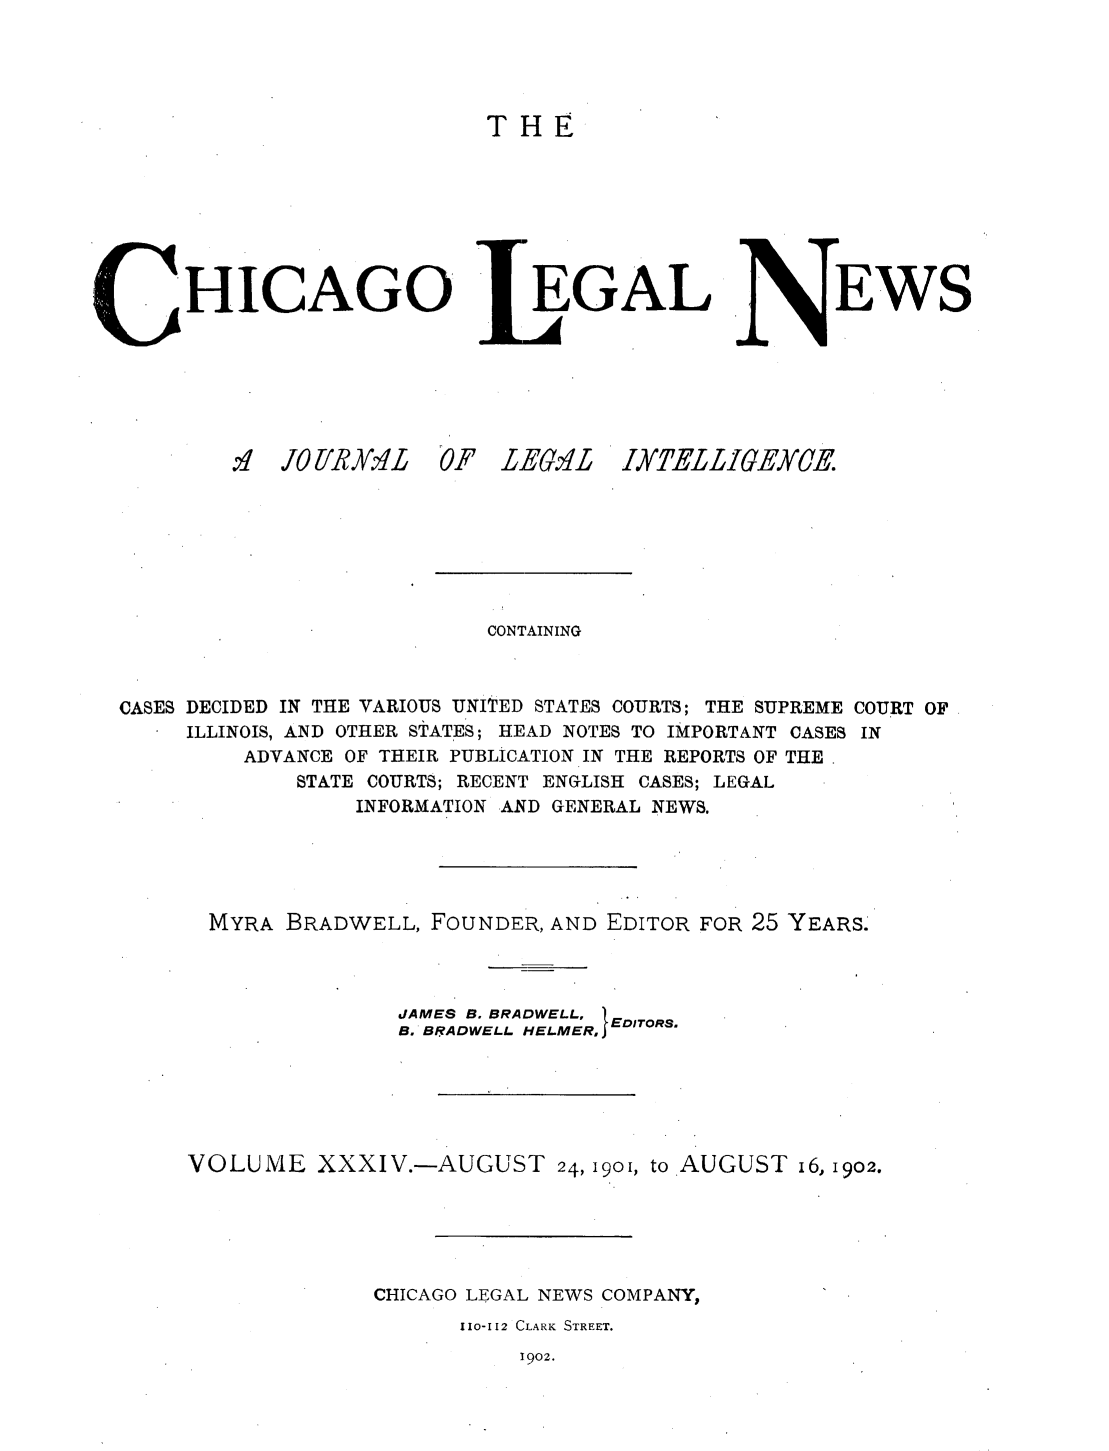 handle is hein.journals/chiclene34 and id is 1 raw text is: THEHICAGO.O4? 10[R VLEGALEWSF LE.VLIXTELLIGEXCE.CONTAININGCASES DECIDED IN THE VARIOUS UNITED STATES COURTS; THE SUPREME COURT OFILLINOIS, AND OTHER STATES; HEAD NOTES TO IMPORTANT CASES INADVANCE OF THEIR PUBLICATION IN THE REPORTS OF THESTATE COURTS; RECENT ENGLISH CASES; LEGALINFORMATION AND GENERAL NEWS.MYRA BRADWELL, FOUNDER, AND EDITOR FOR 25 YEARS.JAMES B. BRADWELL,B. BRADWELL. HELMER, EDITORS.VOLUME XXXIV.-AUGUST 24, 1901, to AUGUST i6, 1902.CHICAGO LEGAL NEWS COMPANY,110-112 CLARK STREET.1902.